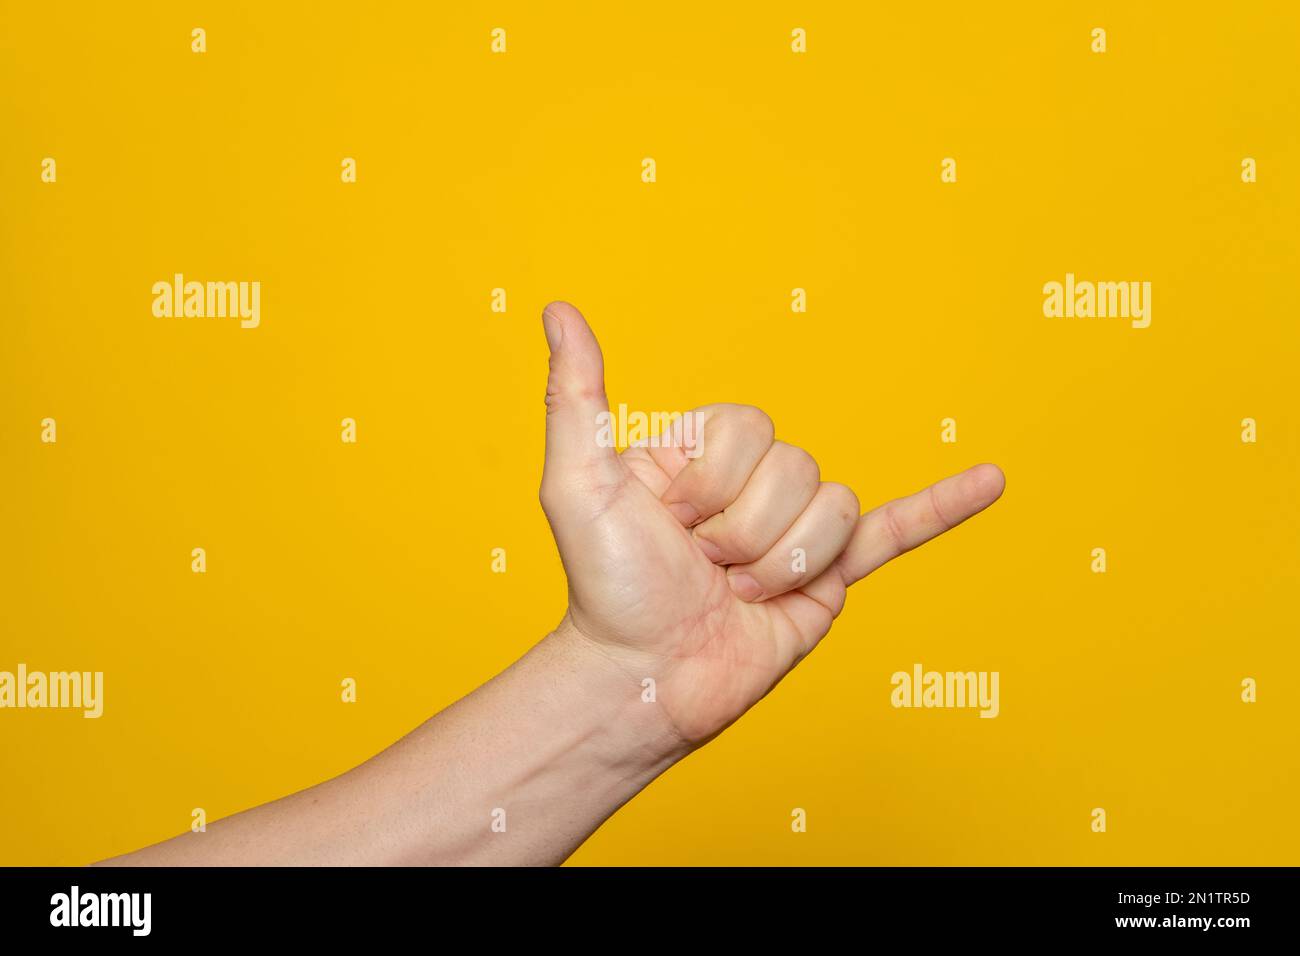 Middle age caucasian man hand over isolated yellow background gesturing hawaiian shaka greeting gesture, phone and communication symbol. Stock Photo